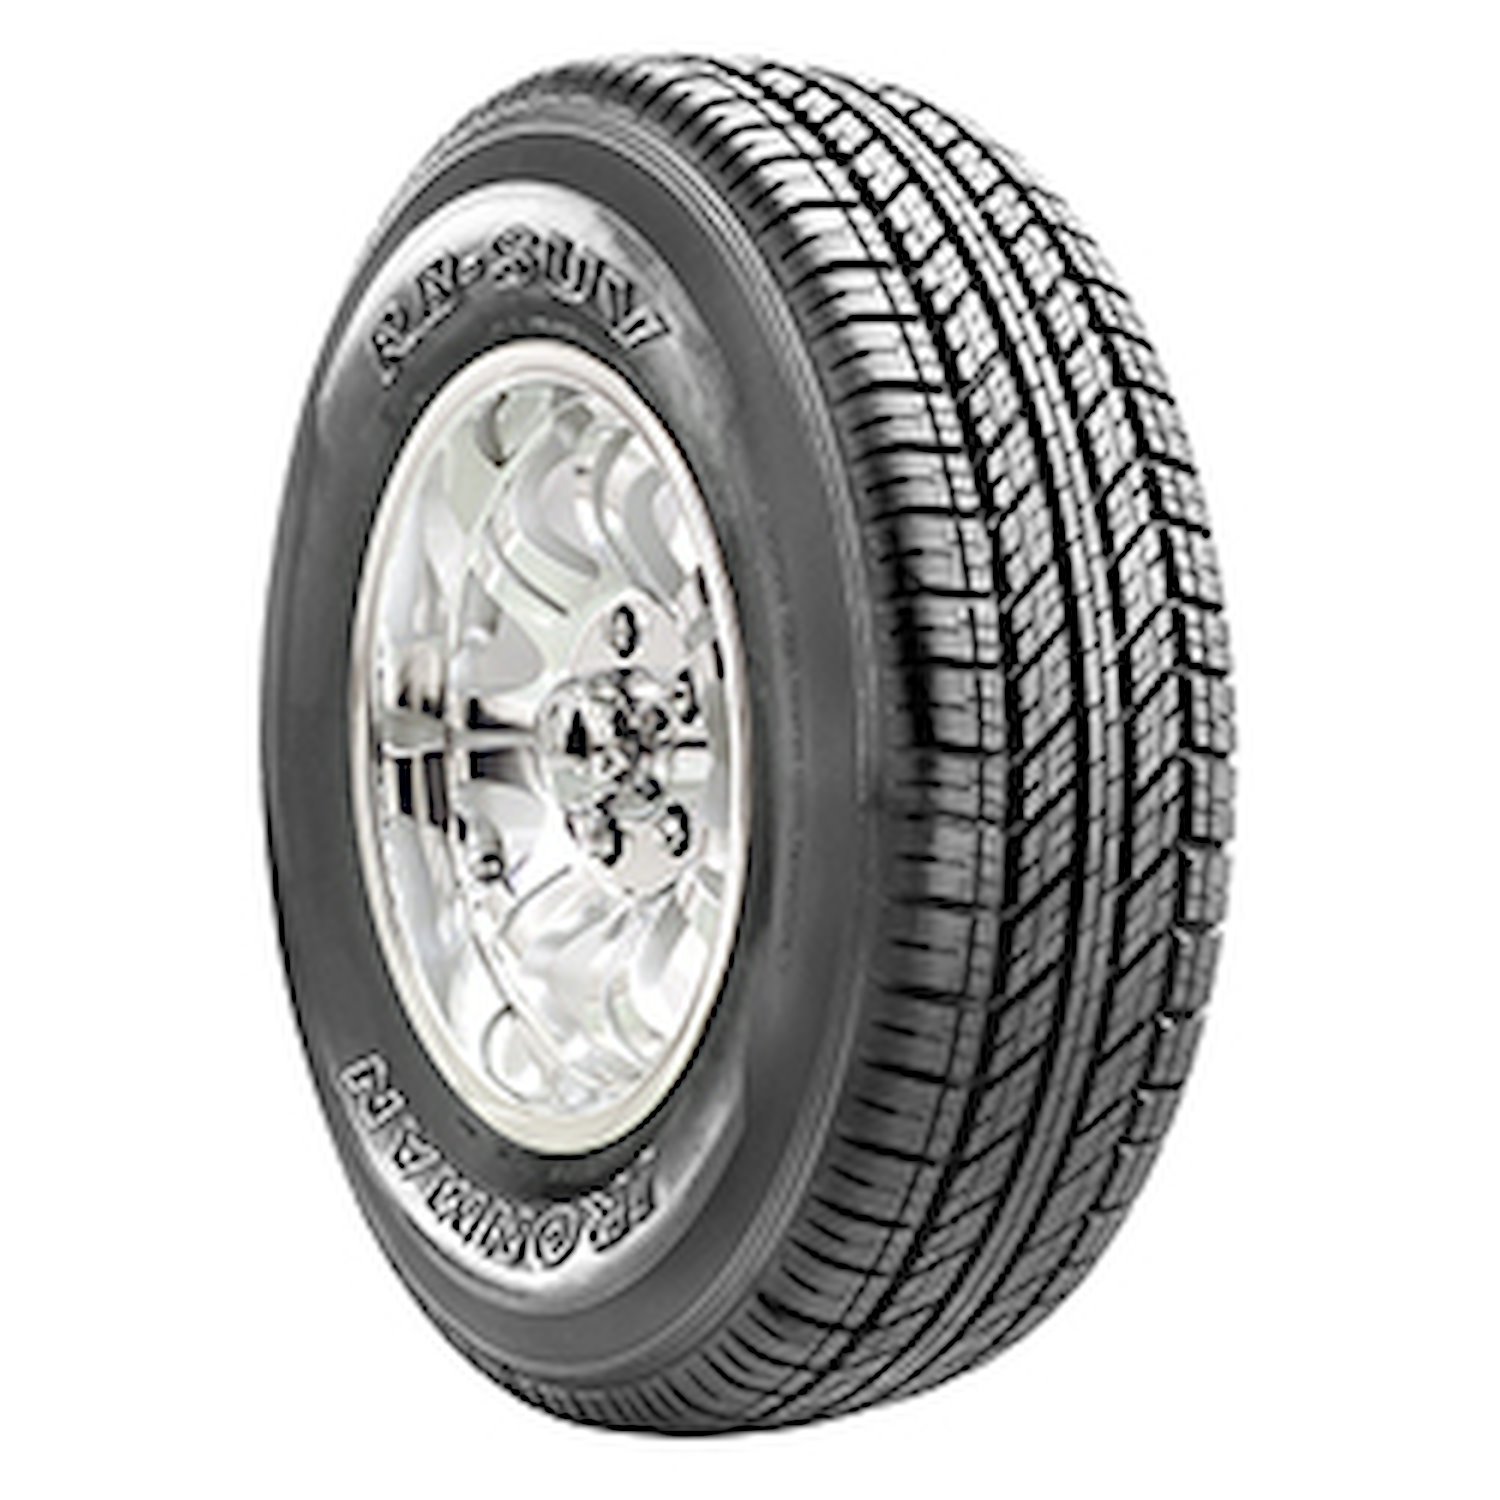 RB SUV Tire, 235/70R15 103S